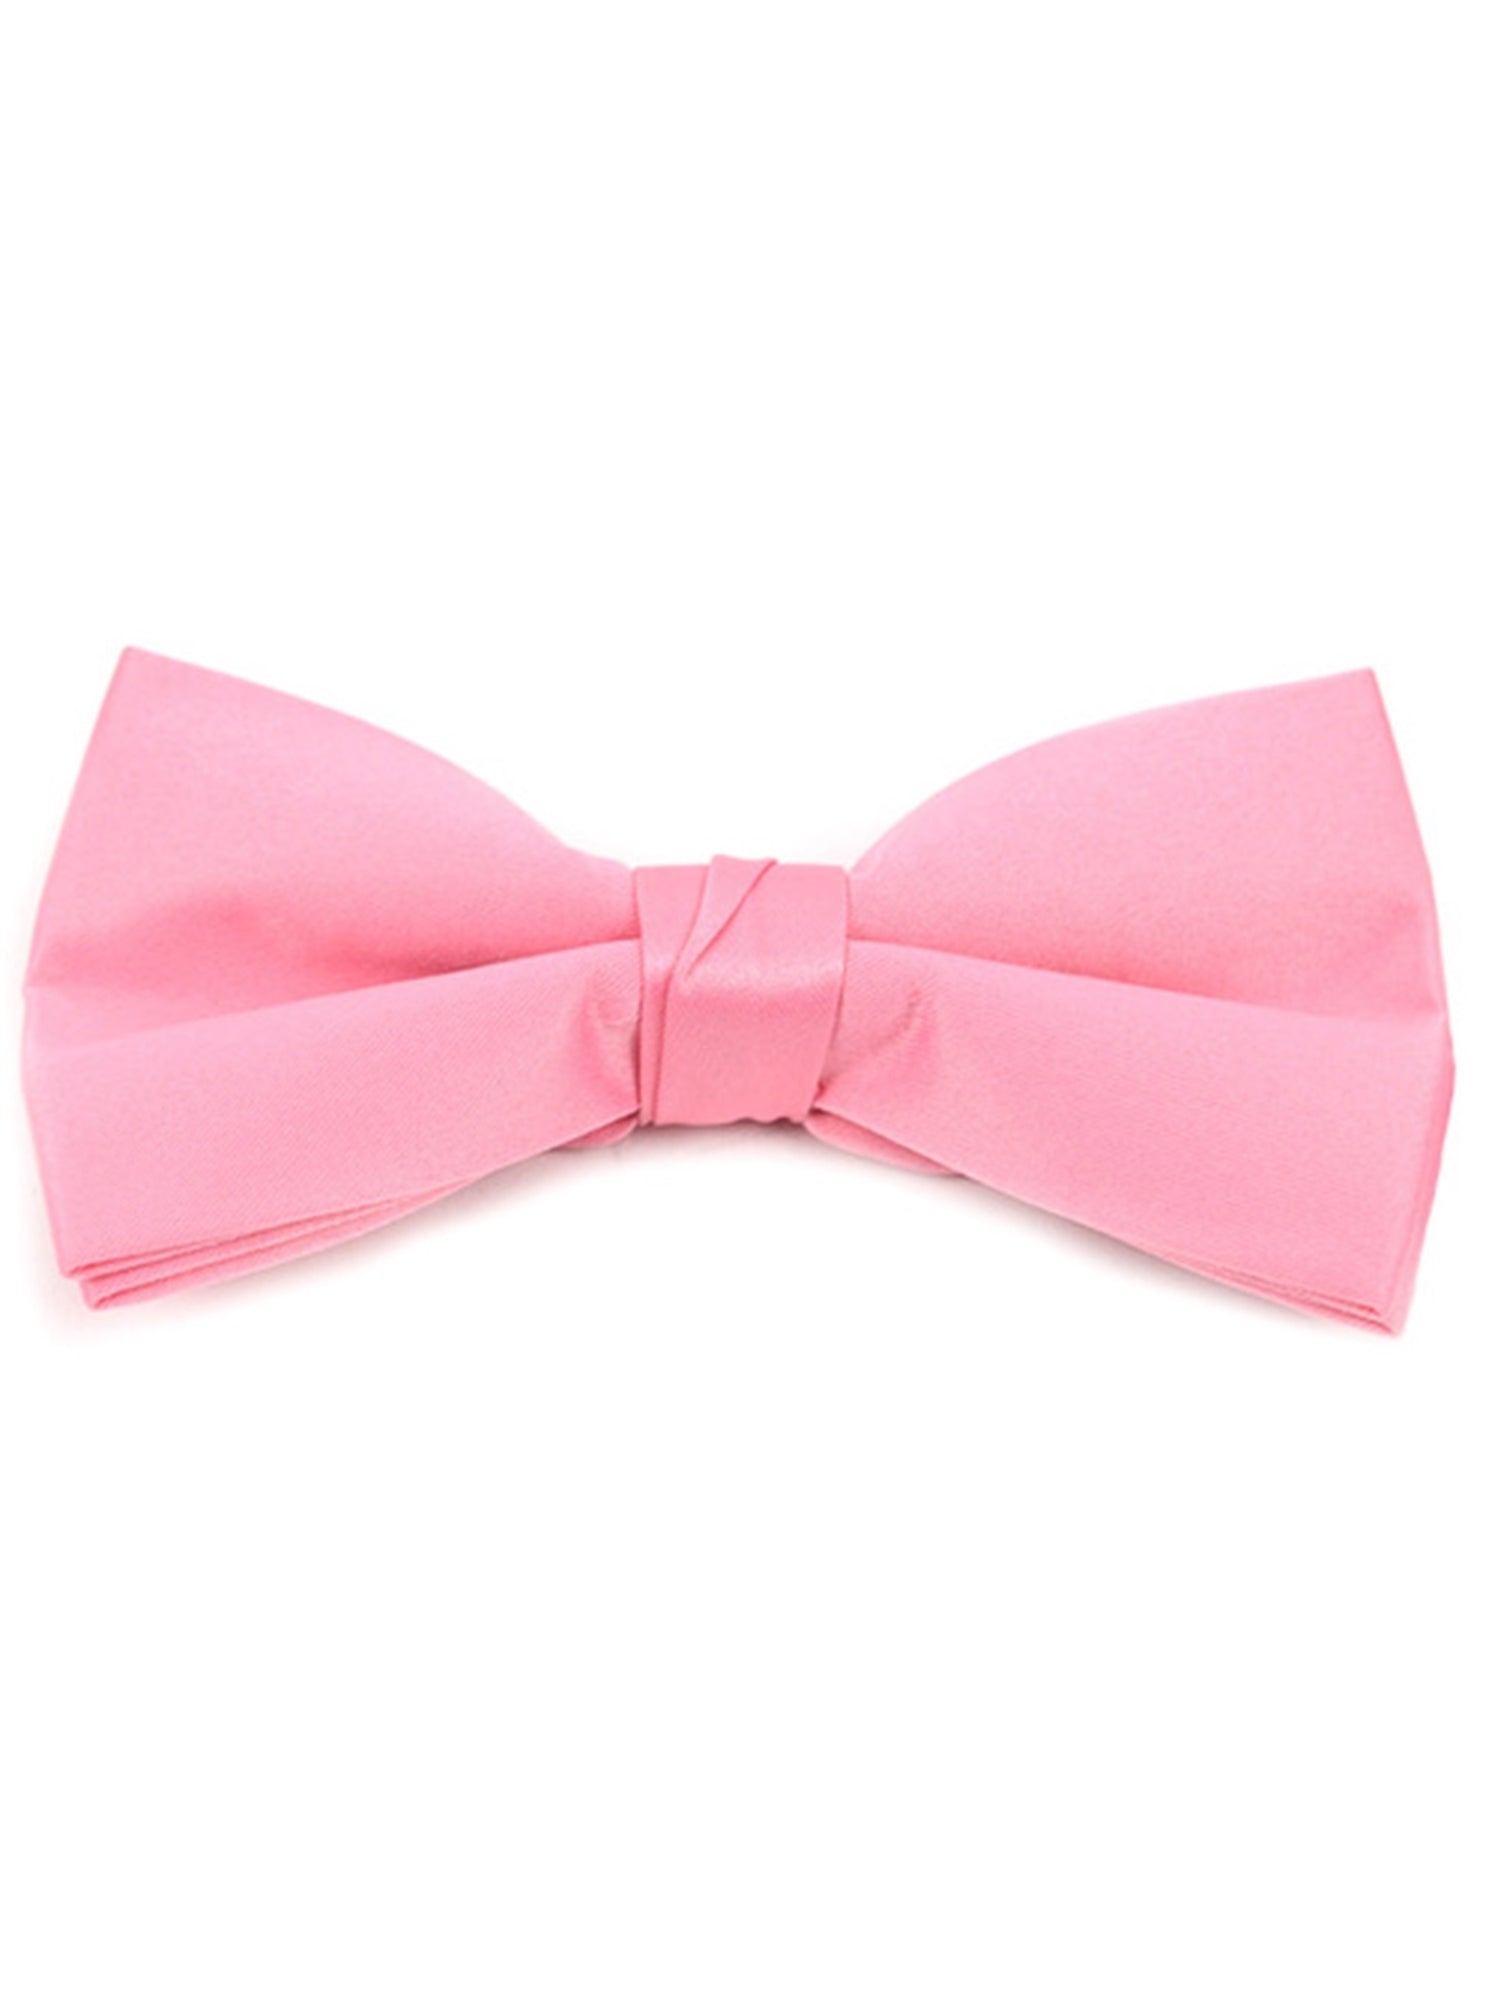 Young Boy's Pre-tied Clip On Bow Tie - Formal Tuxedo Solid Color Boy's Solid Color Bow Tie TheDapperTie Hot Pink One Size 